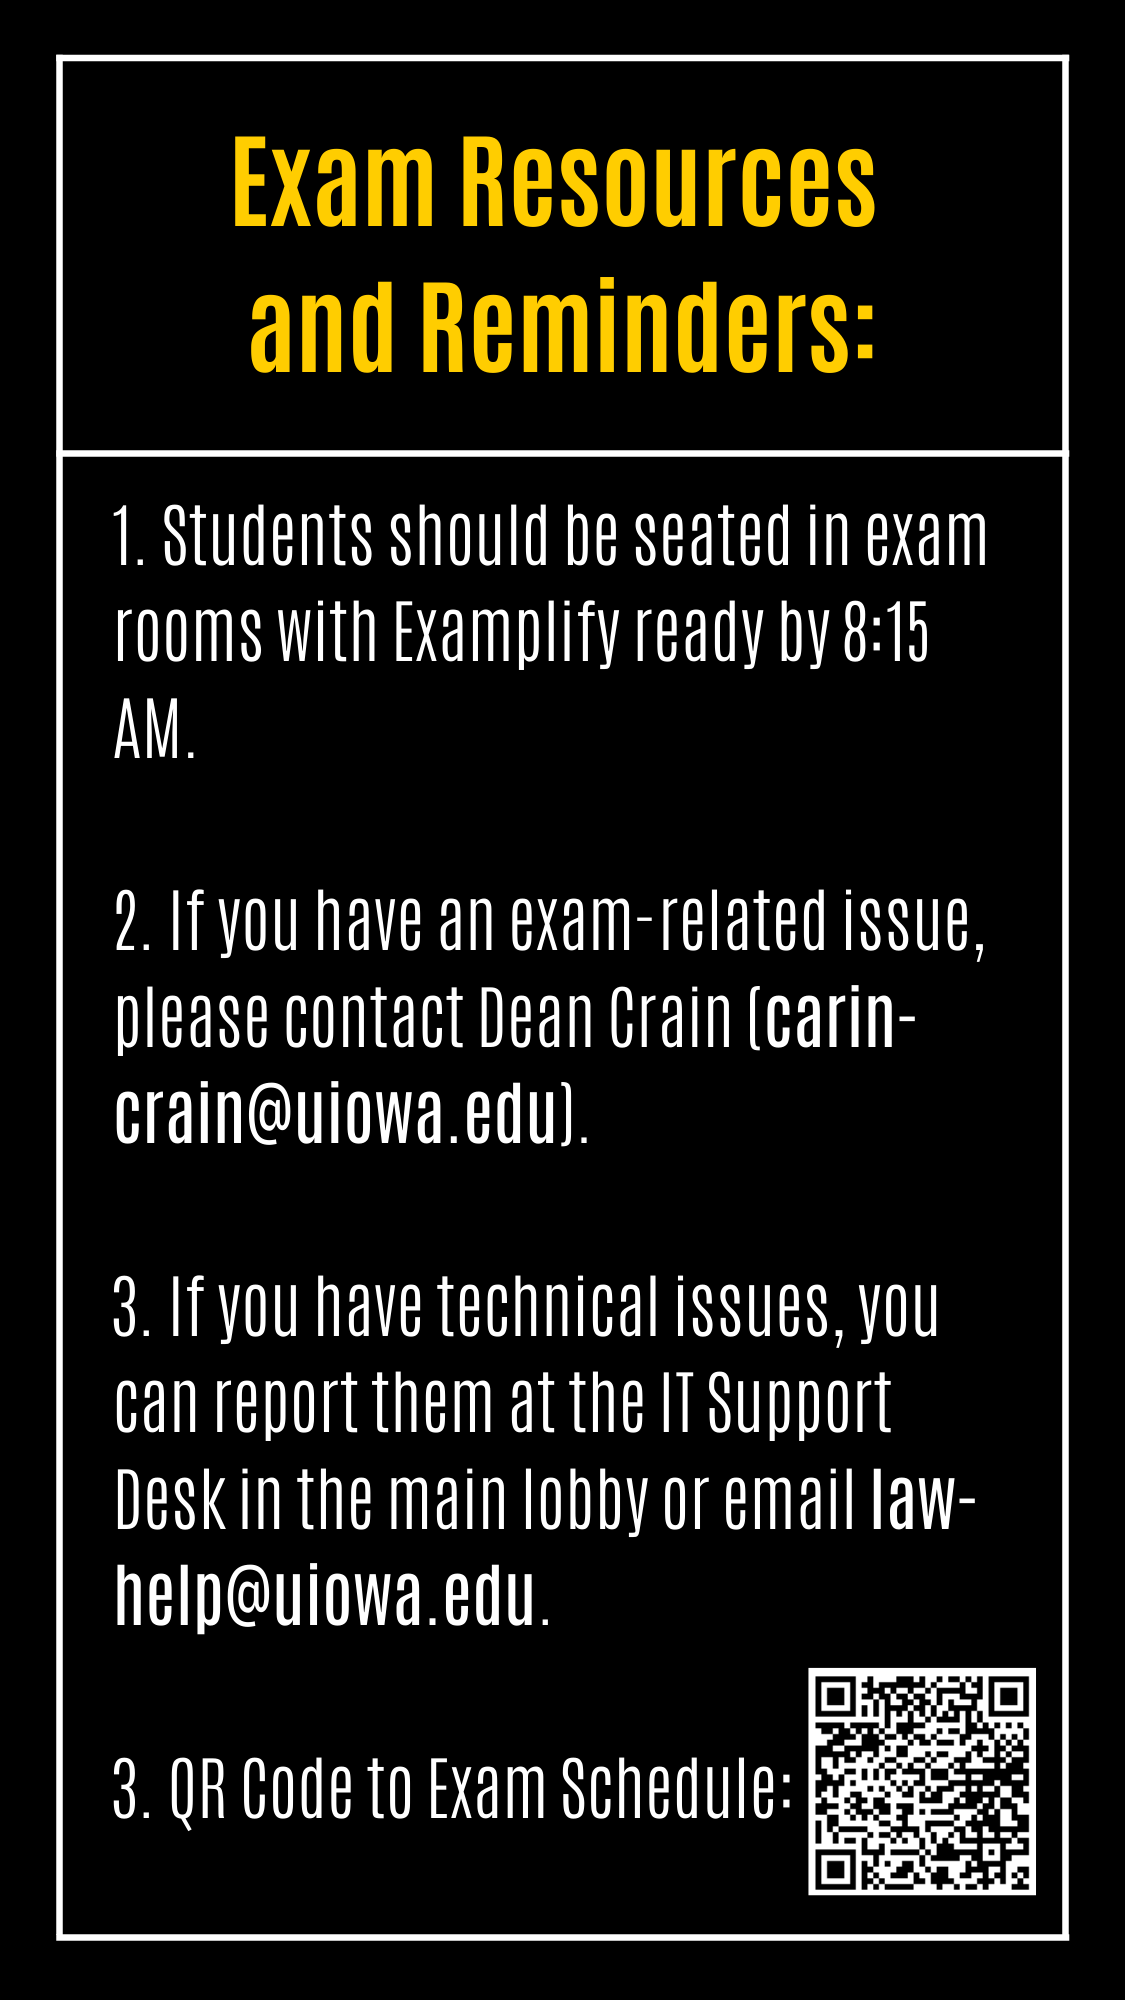 1. Students should be seated in exam rooms with Examplify ready by 8:15 AM.   2. If you have an exam-related issue, please contact Dean Crain (carin-crain@uiowa.edu).  3. If you have technical issues, you can report them at the IT Support Desk in the main lobby or email law-help@uiowa.edu.   3. QR Code to Exam Schedule: Exam Resources  and Reminders: